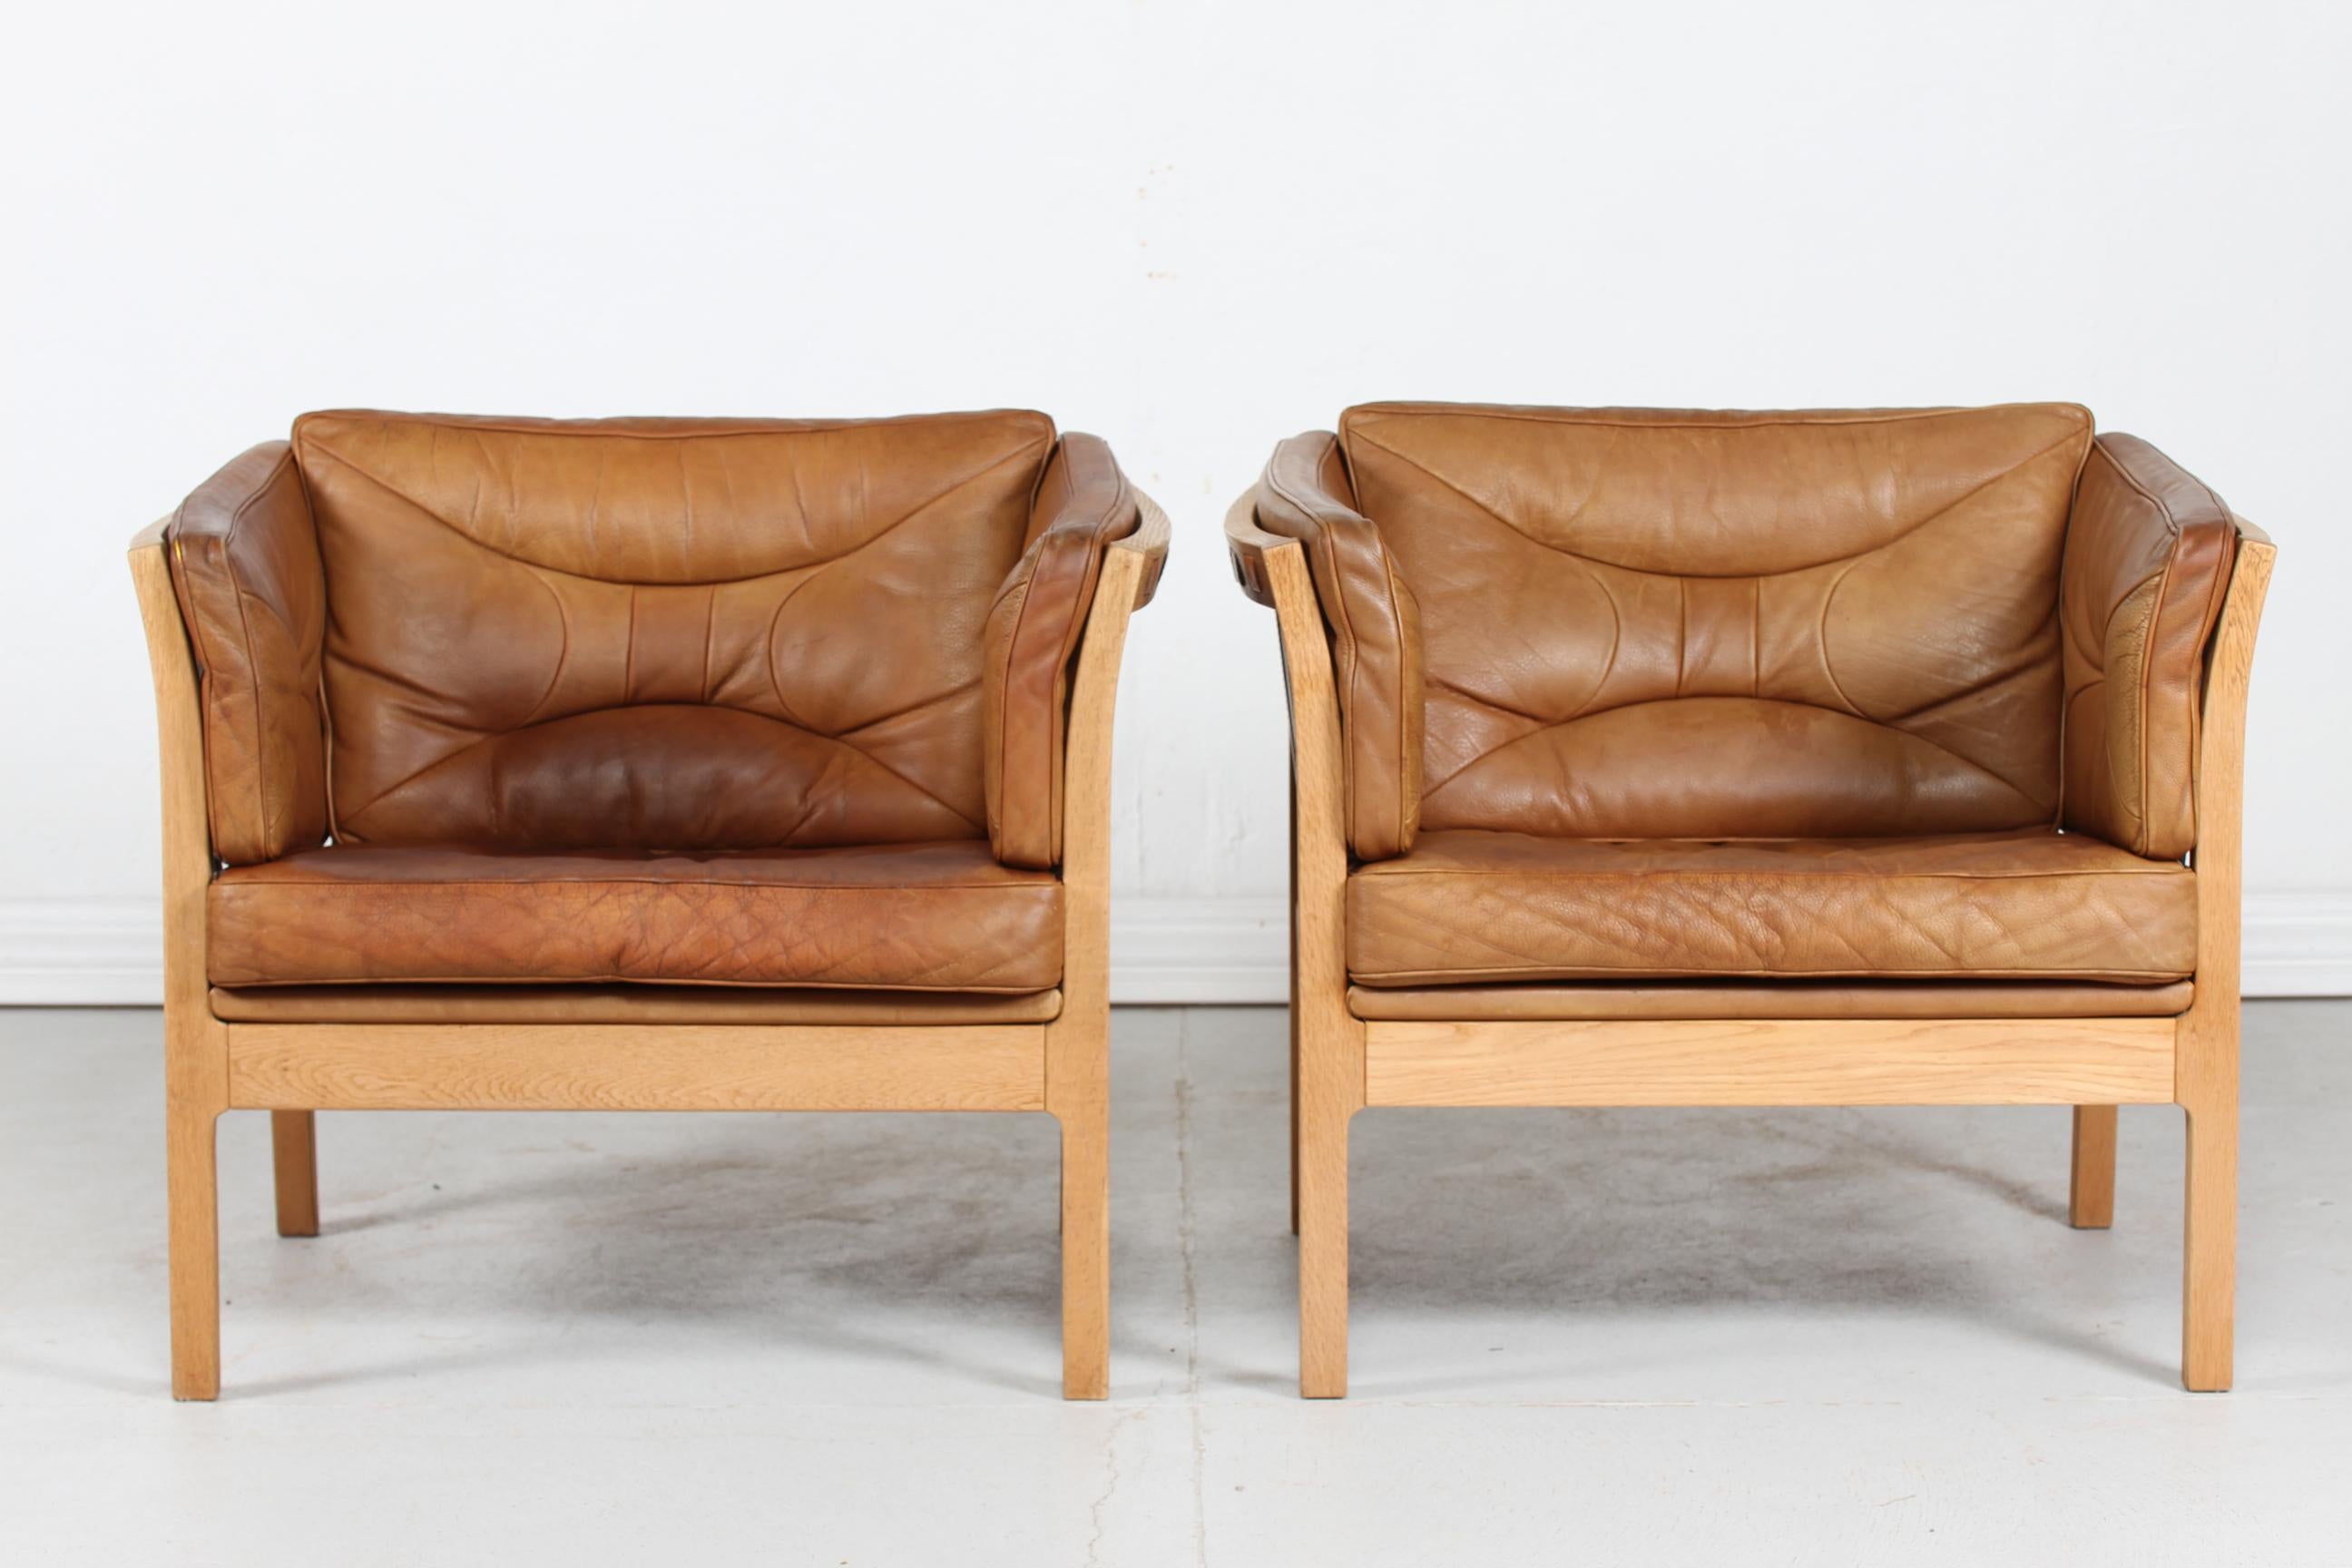 Danish modern pair of easy chairs or lounge chairs. 
They a made of oak with strips and cushions of genuine leather.

The chairs remain in very nice vintage condition with good patina - see photos.